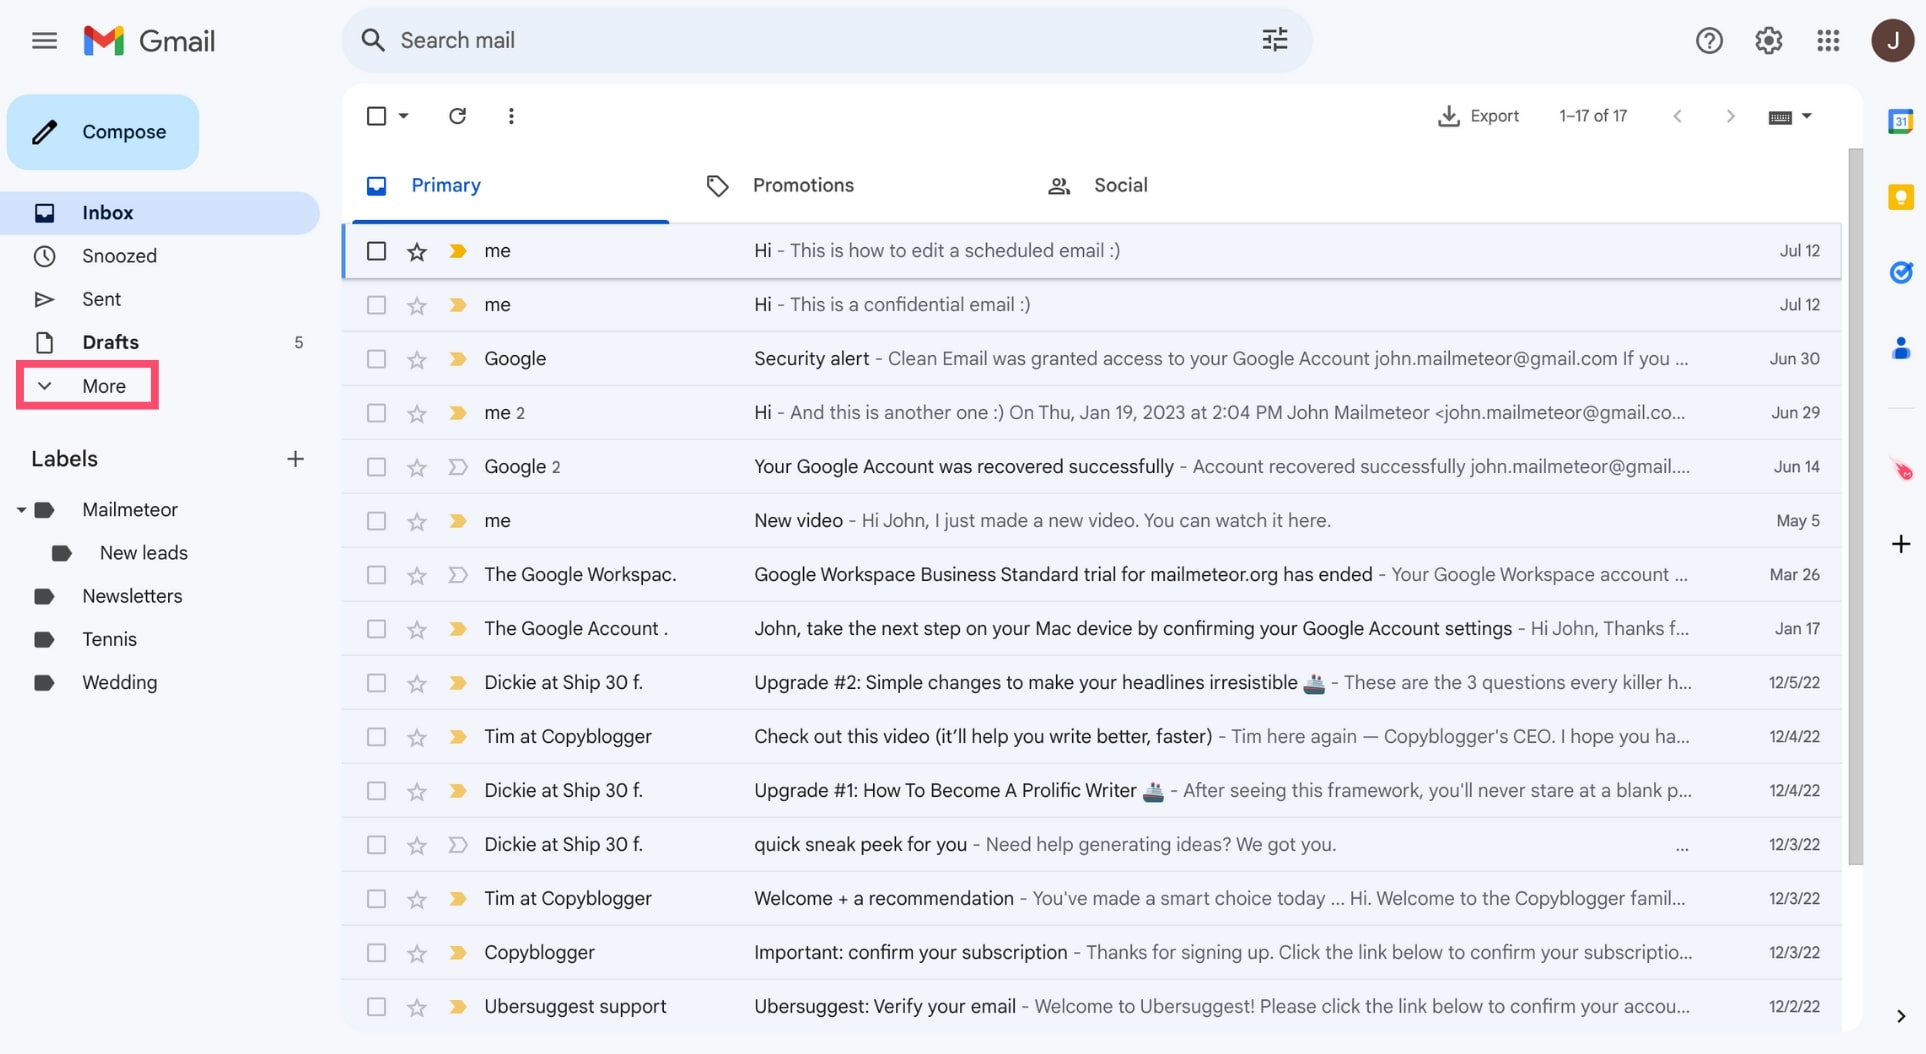 Display all your Gmail folders